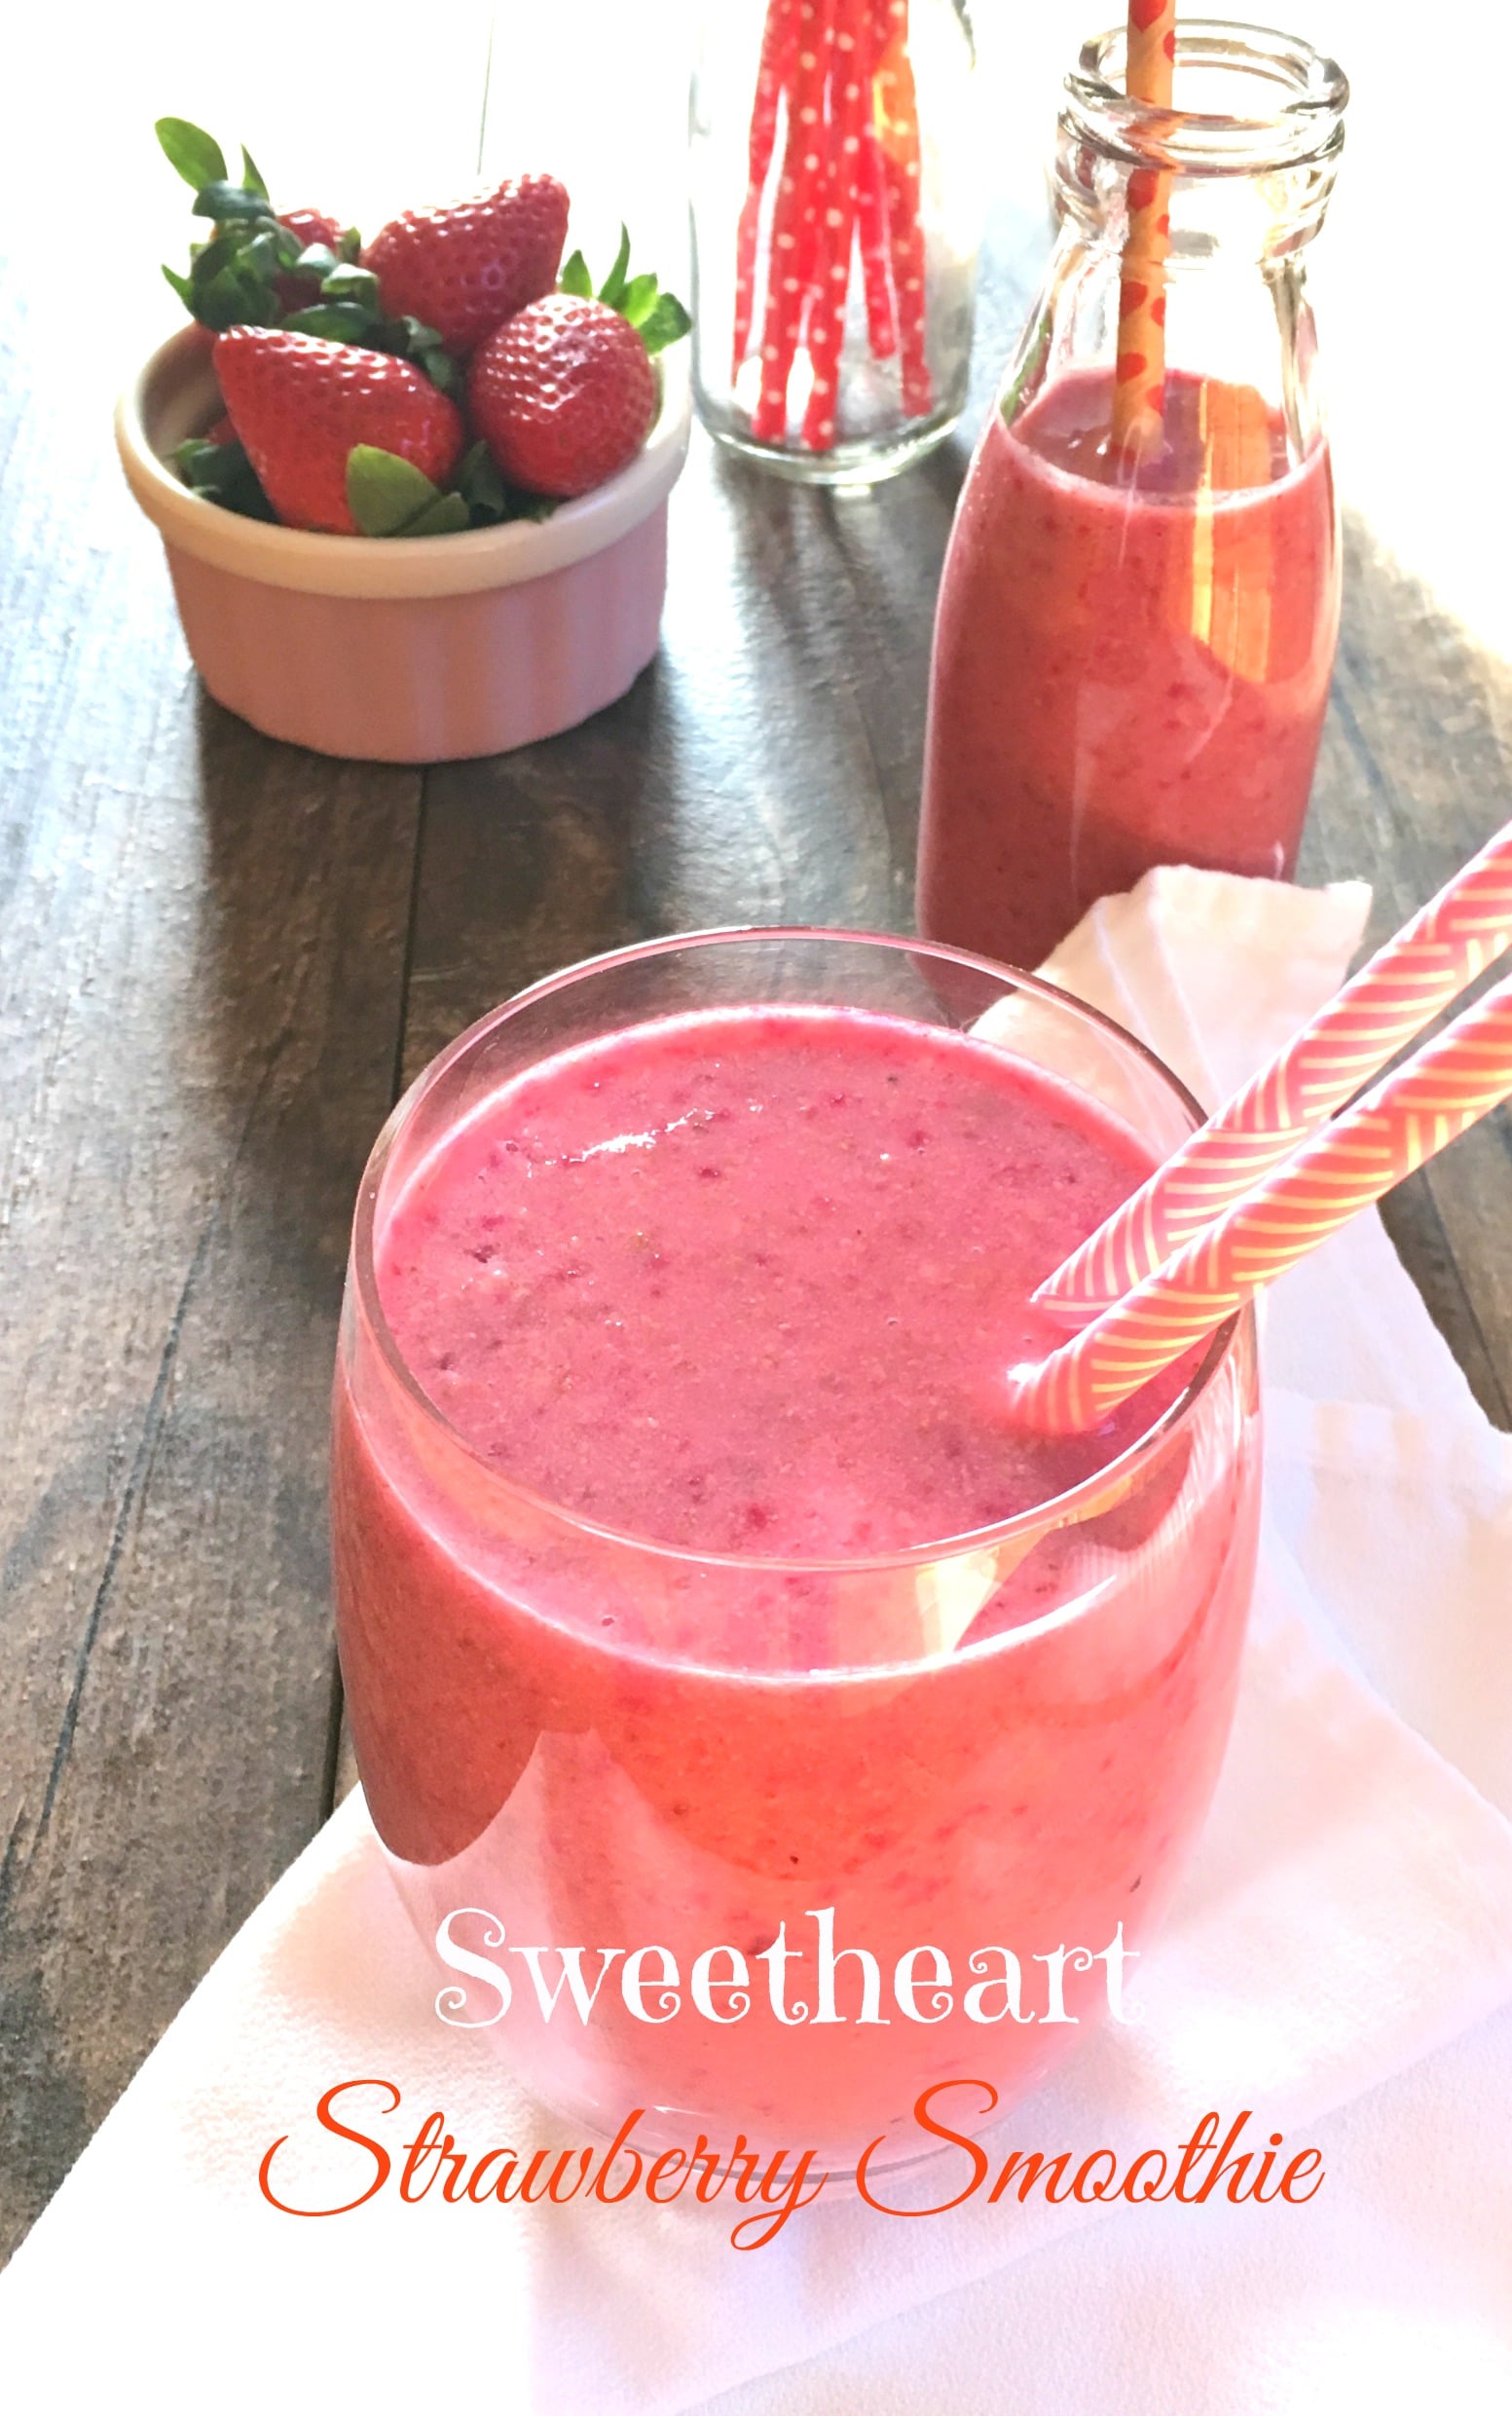 Wake up your Sweetheart with this delicious protein packed strawberry smoothie.